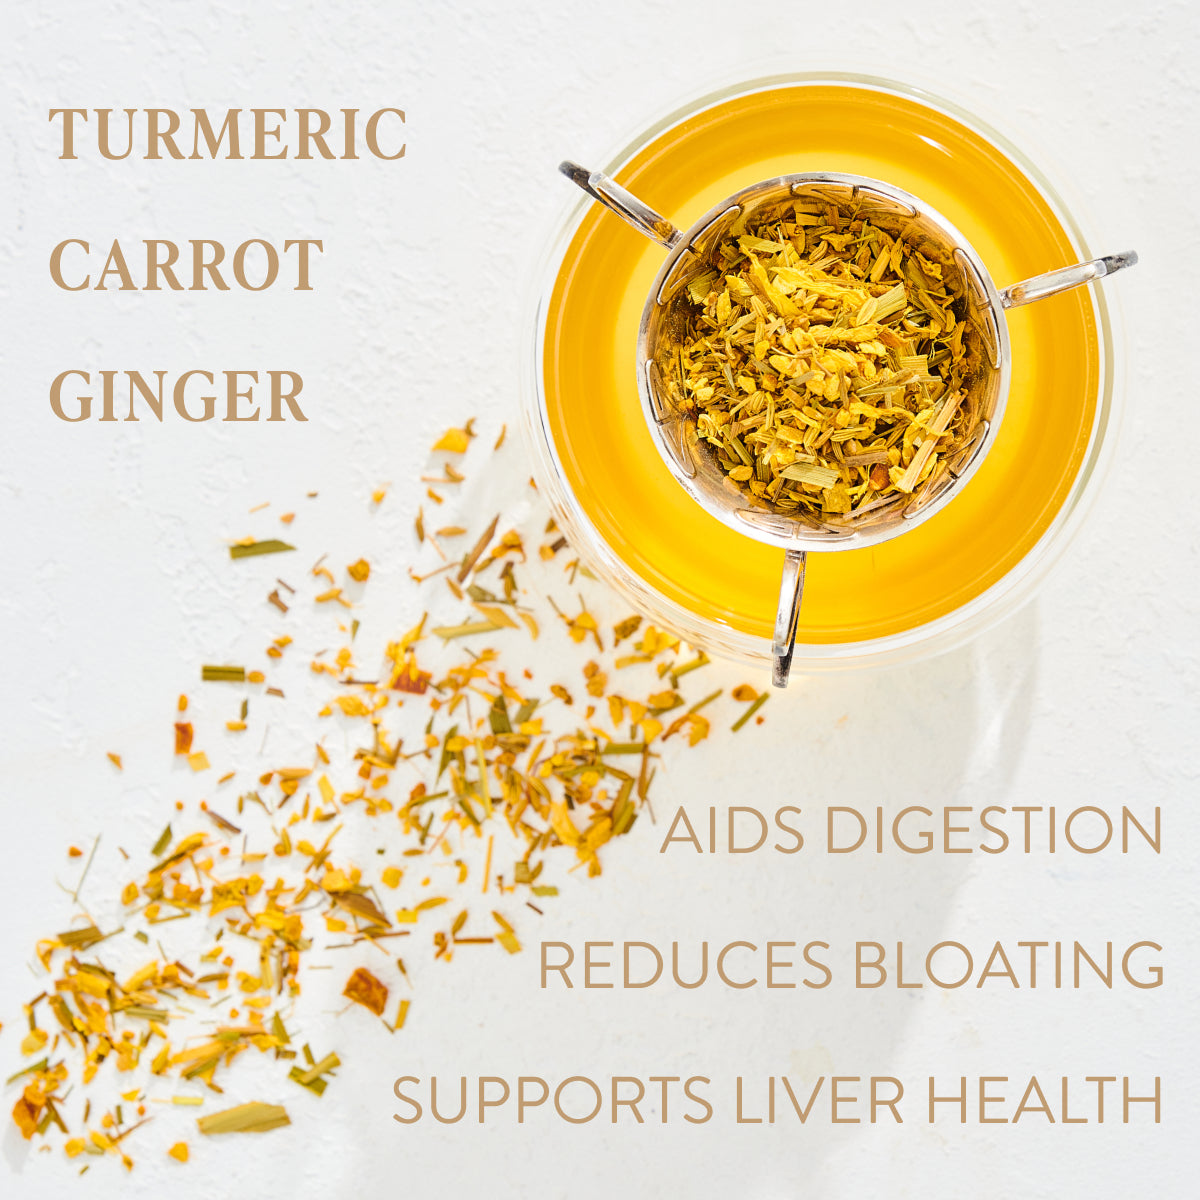 A top view of a glass containing an orange liquid garnished with turmeric, carrot, and ginger pieces, slightly spilled on the white surface. Text on the image highlights benefits: "Aids Digestion," "Reduces Bloating," and "Supports Liver Health." Experience the enchantment of Citrine Cleanse™ Herbal Tea by Magic Hour.